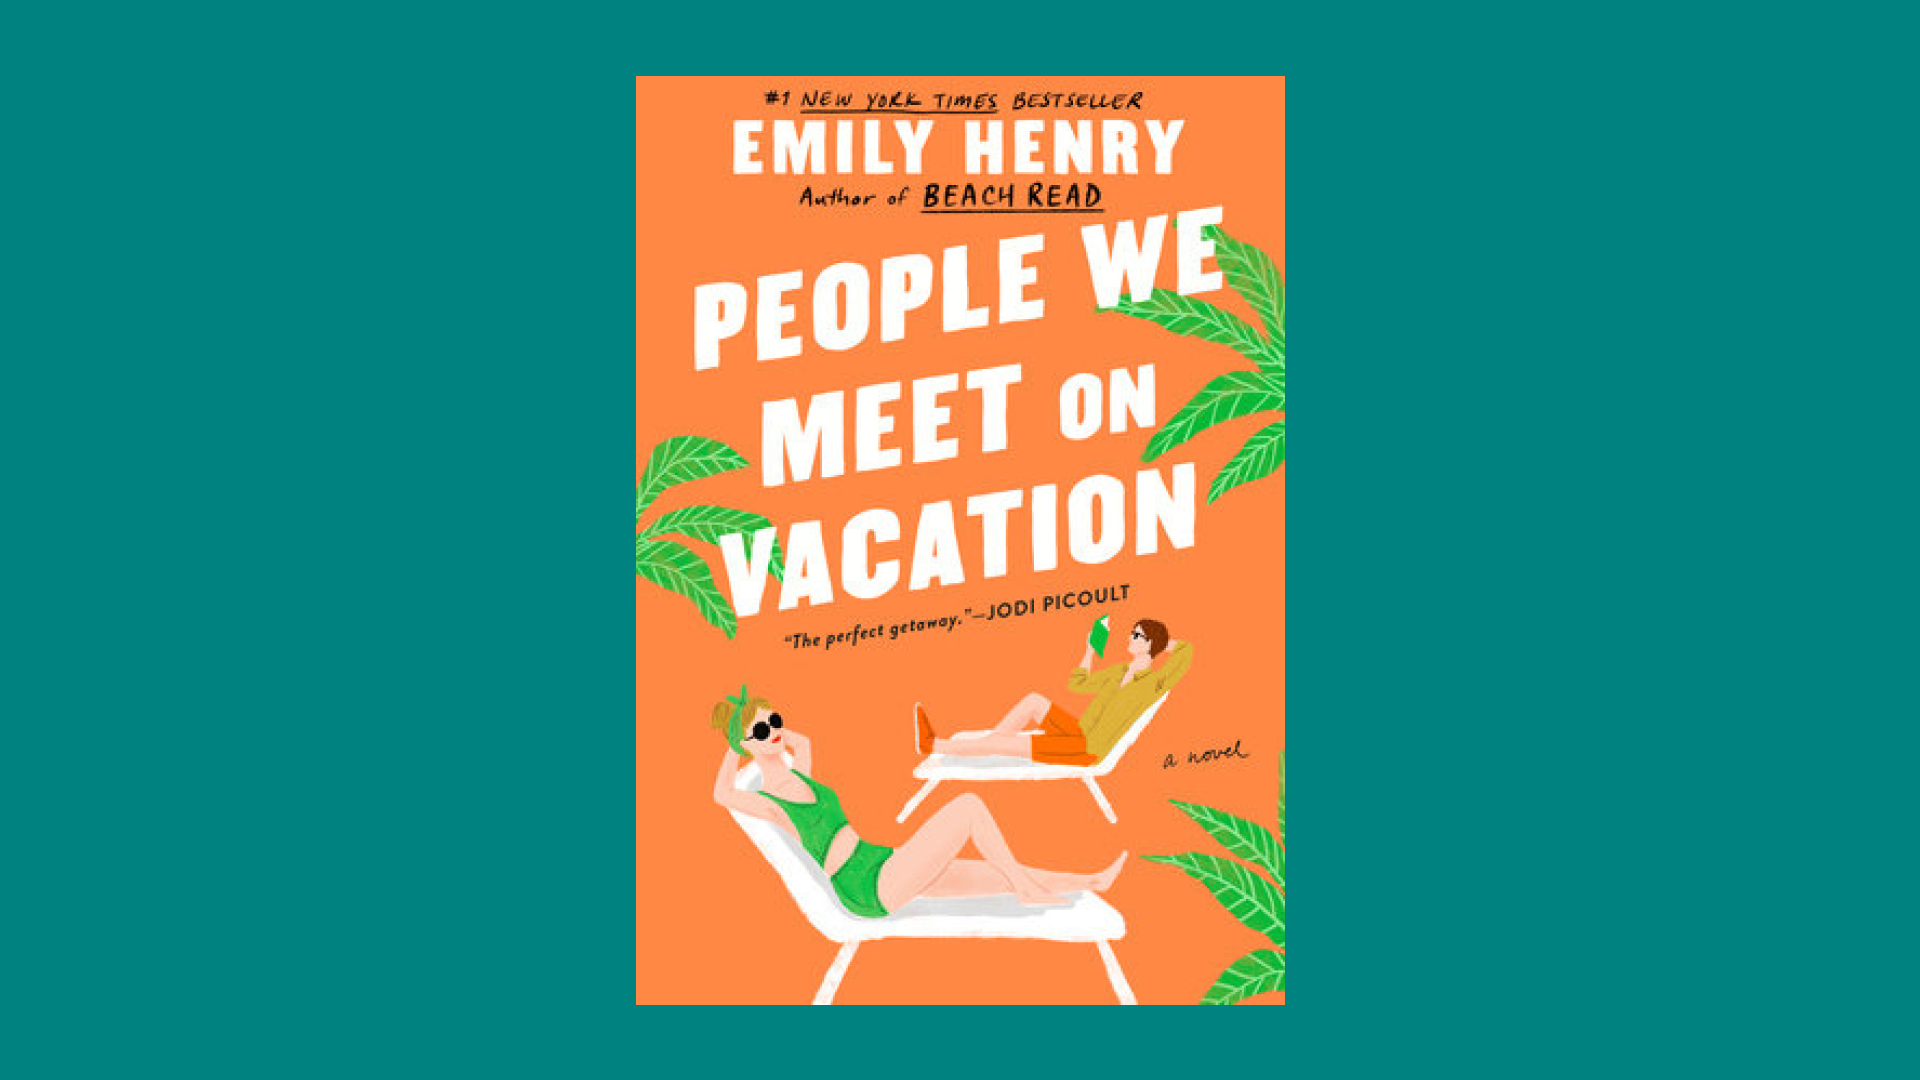 “People We Meet on Vacation” by Emily Henry